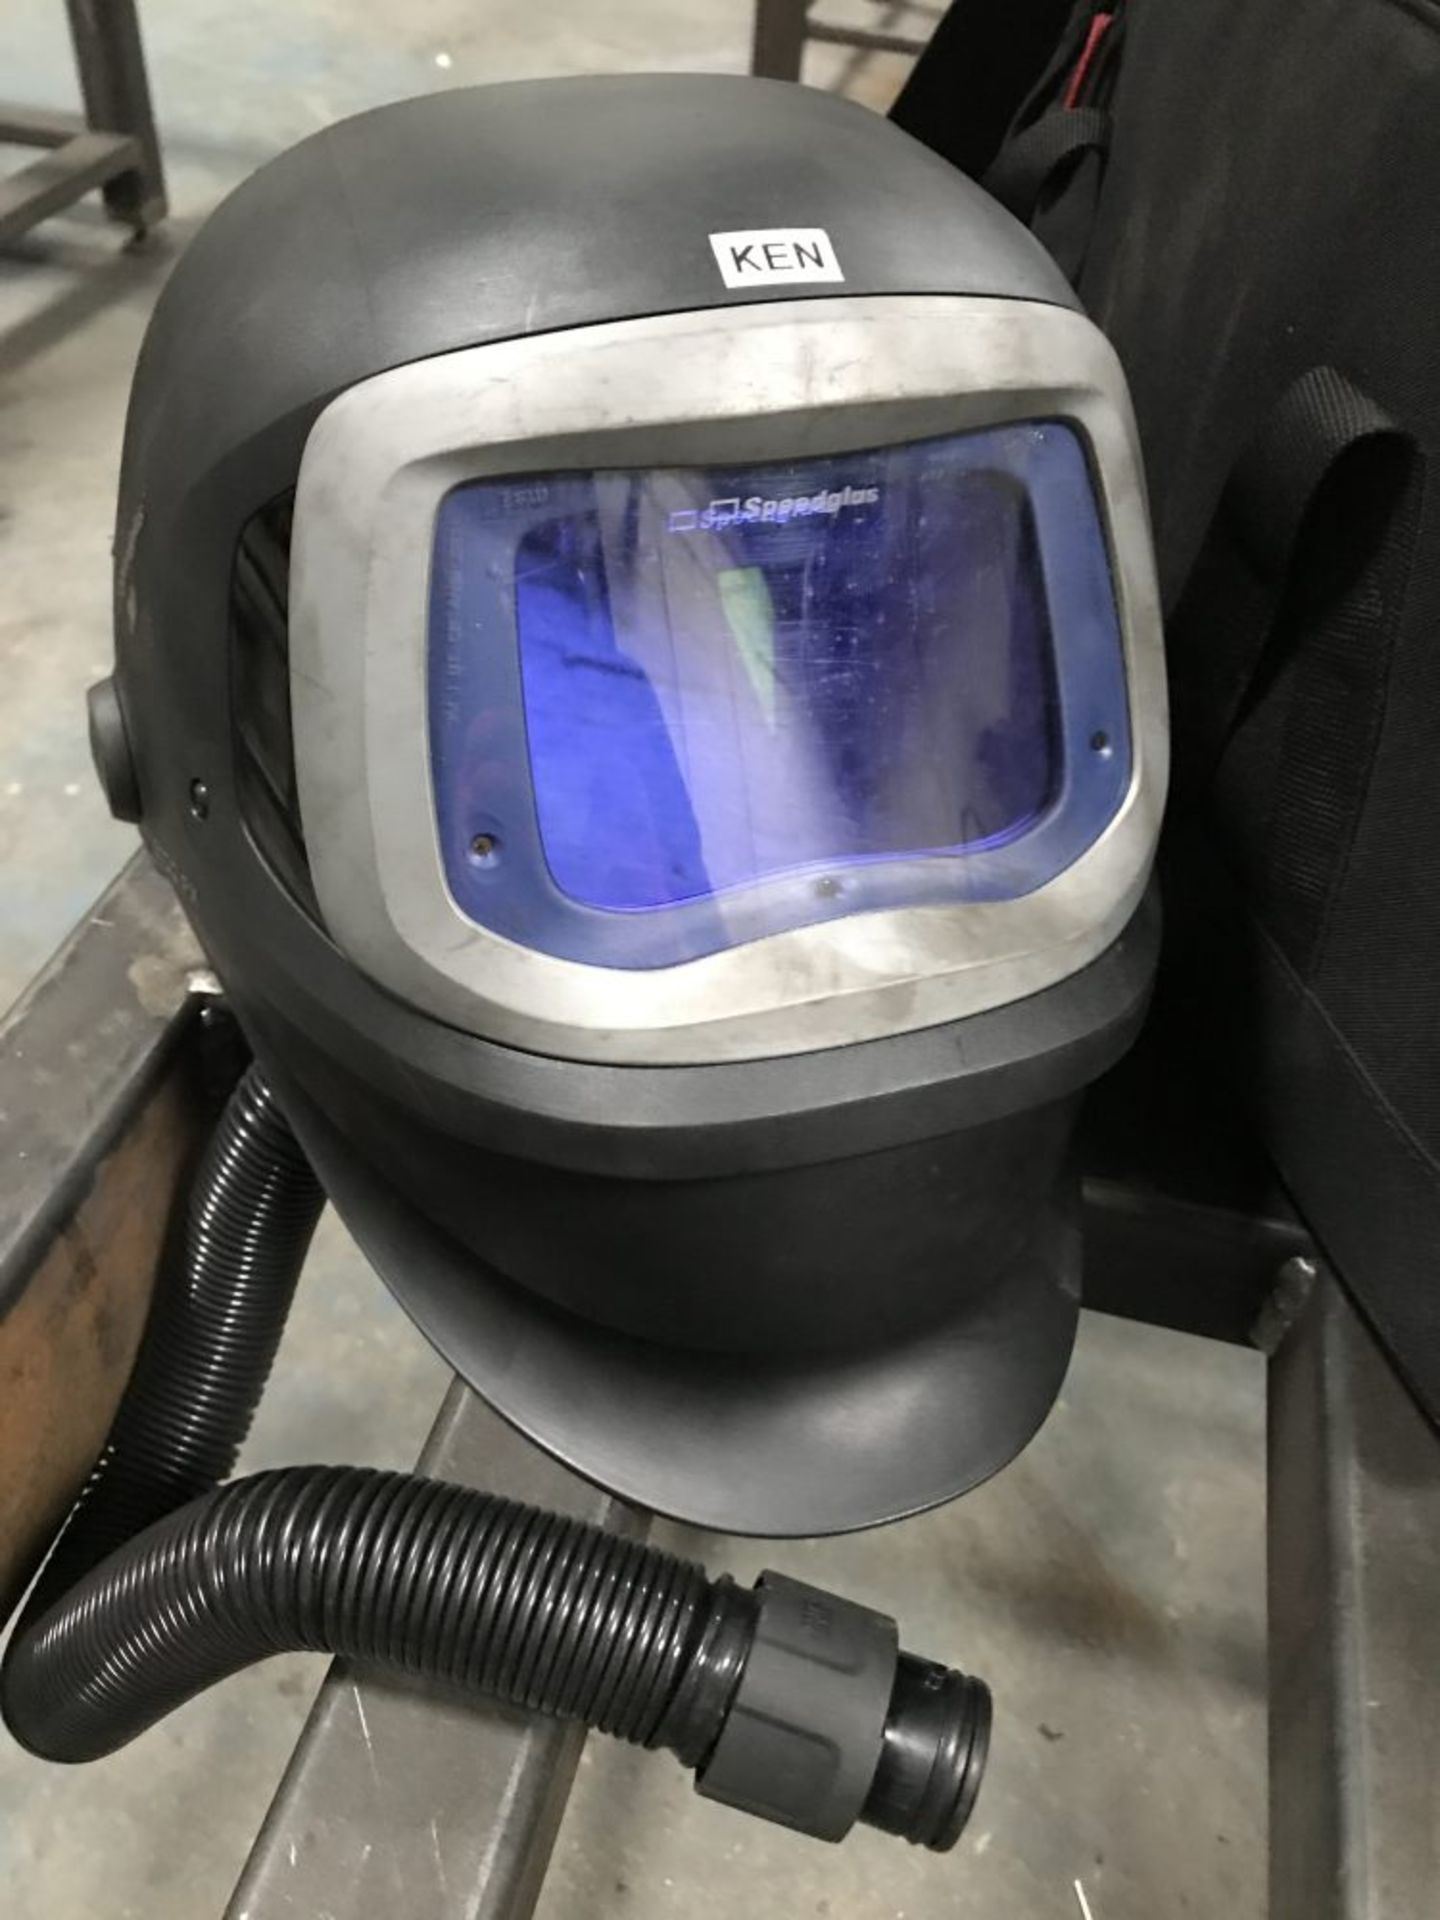 2 3M Speedglas 9100 air respirator welding helmets with Adflow battery packs, chargers and bags - Image 2 of 11